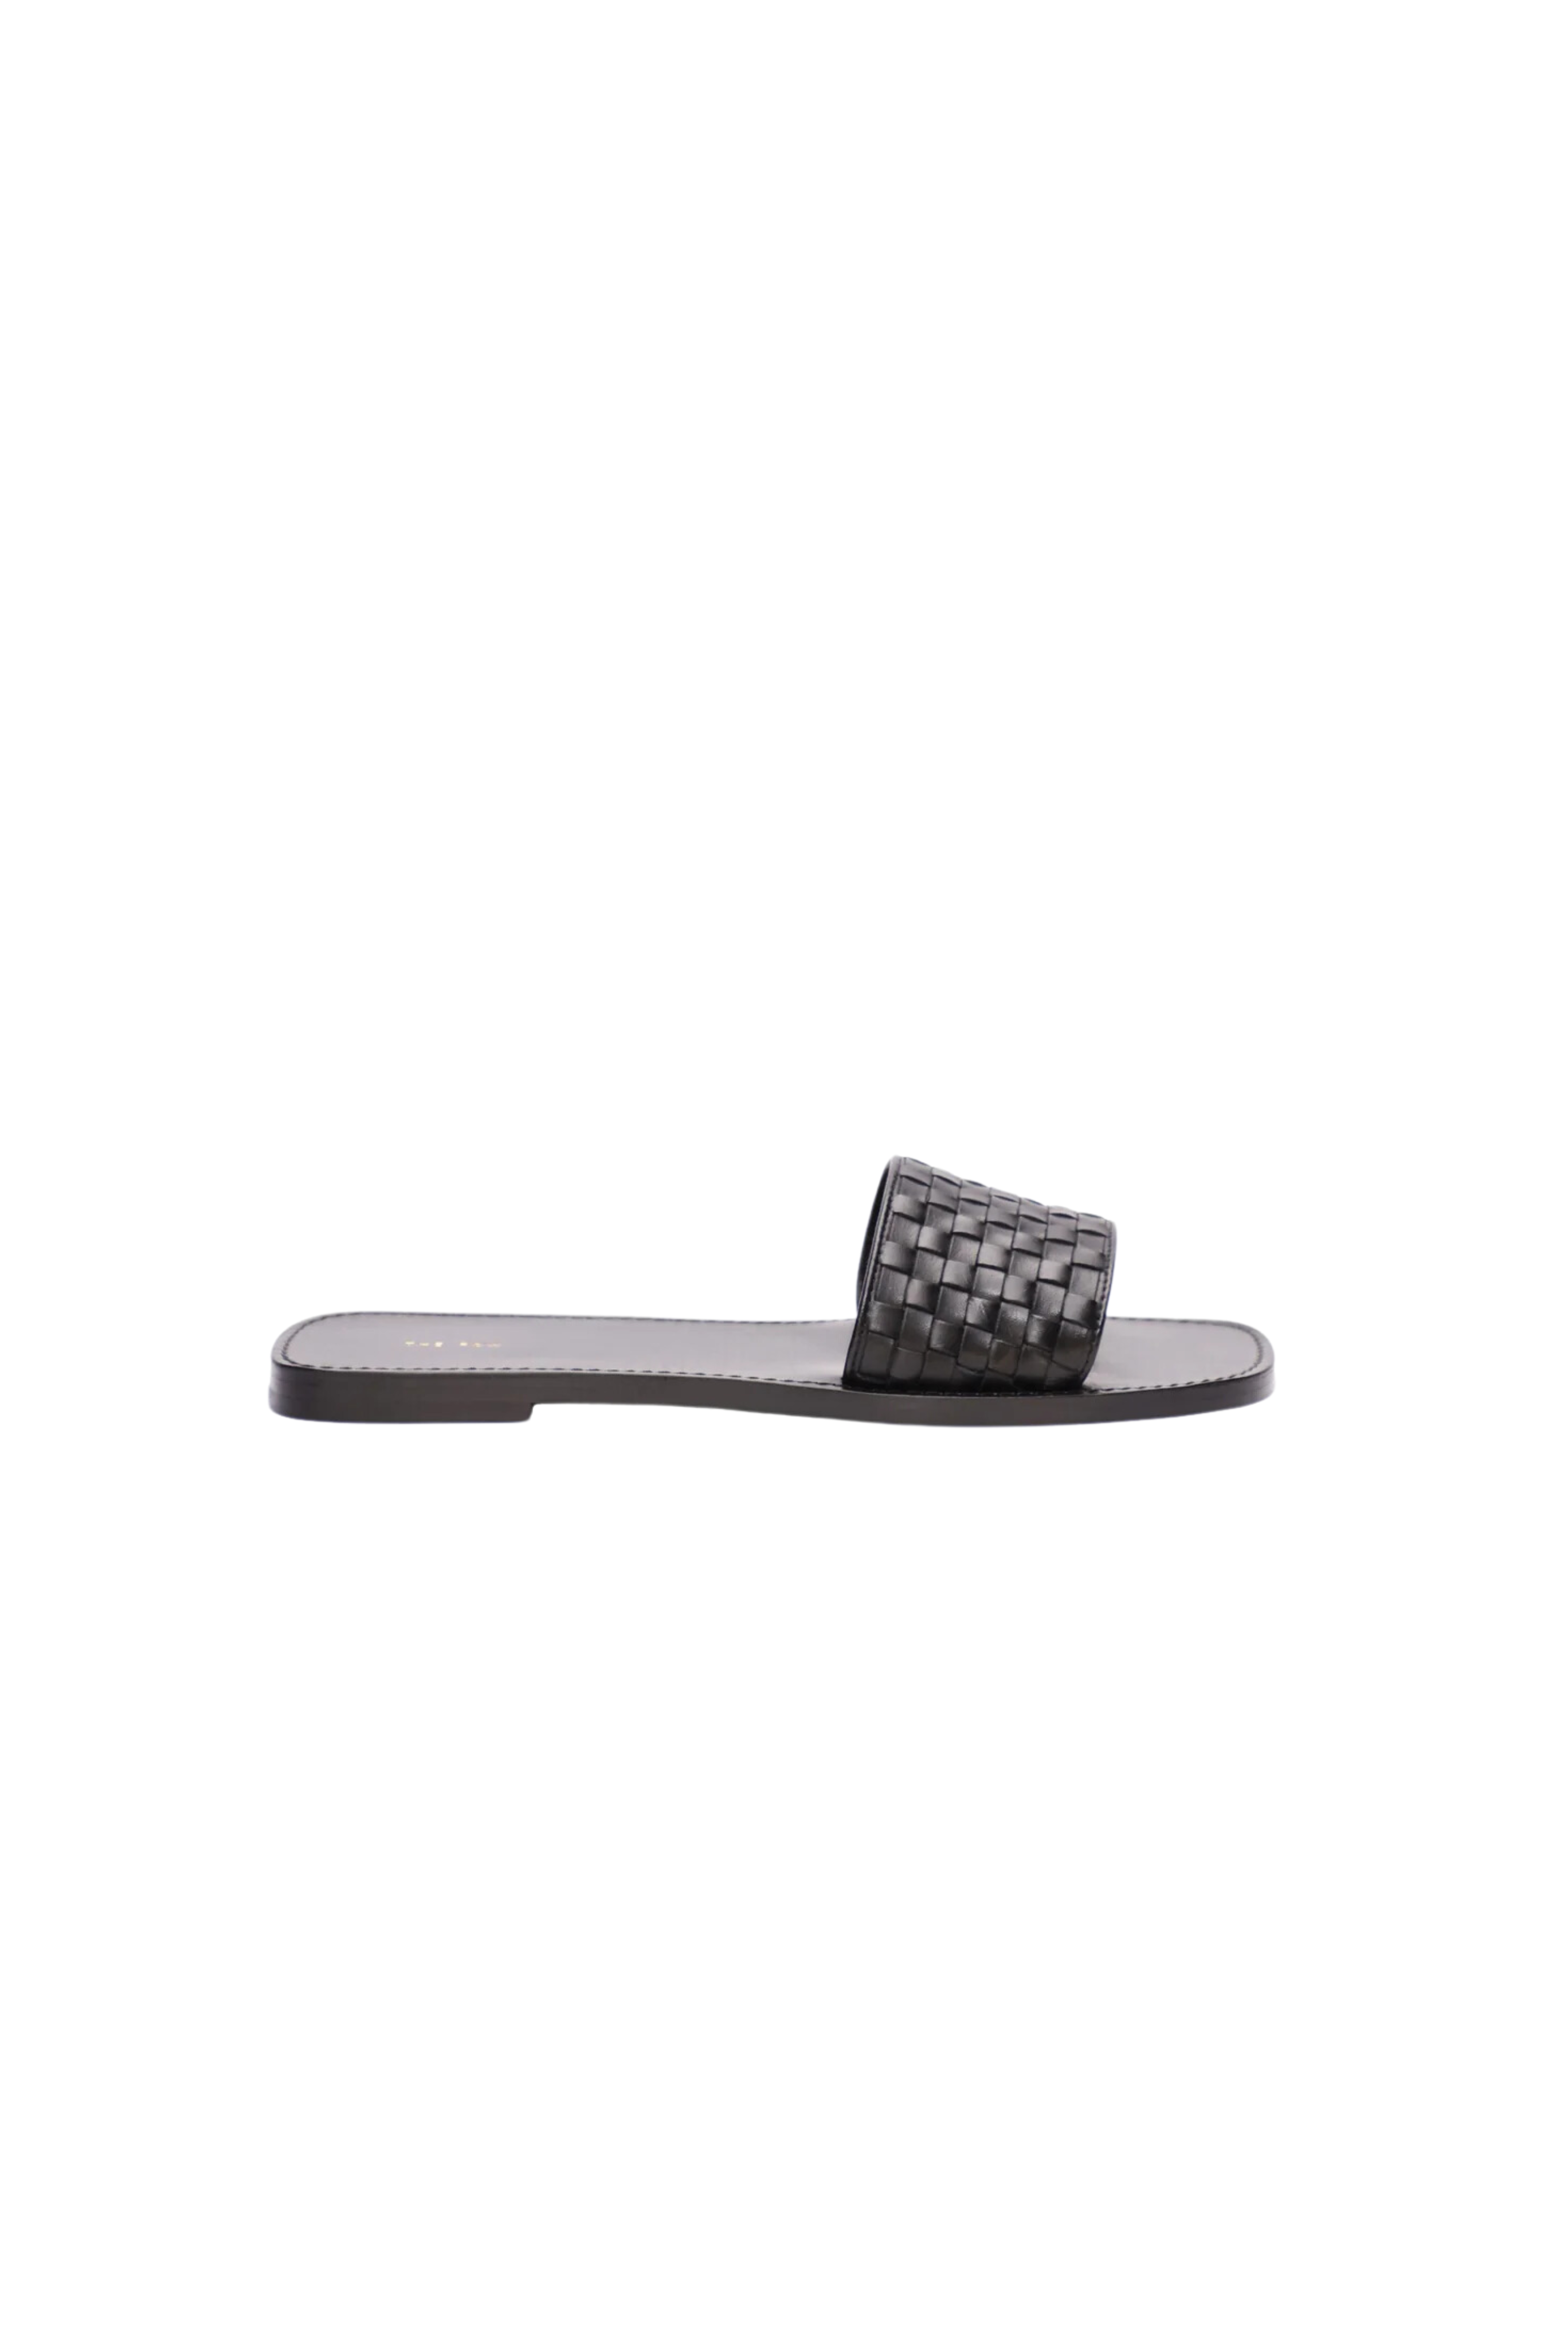 THE ROW Link Woven Leather Sandals